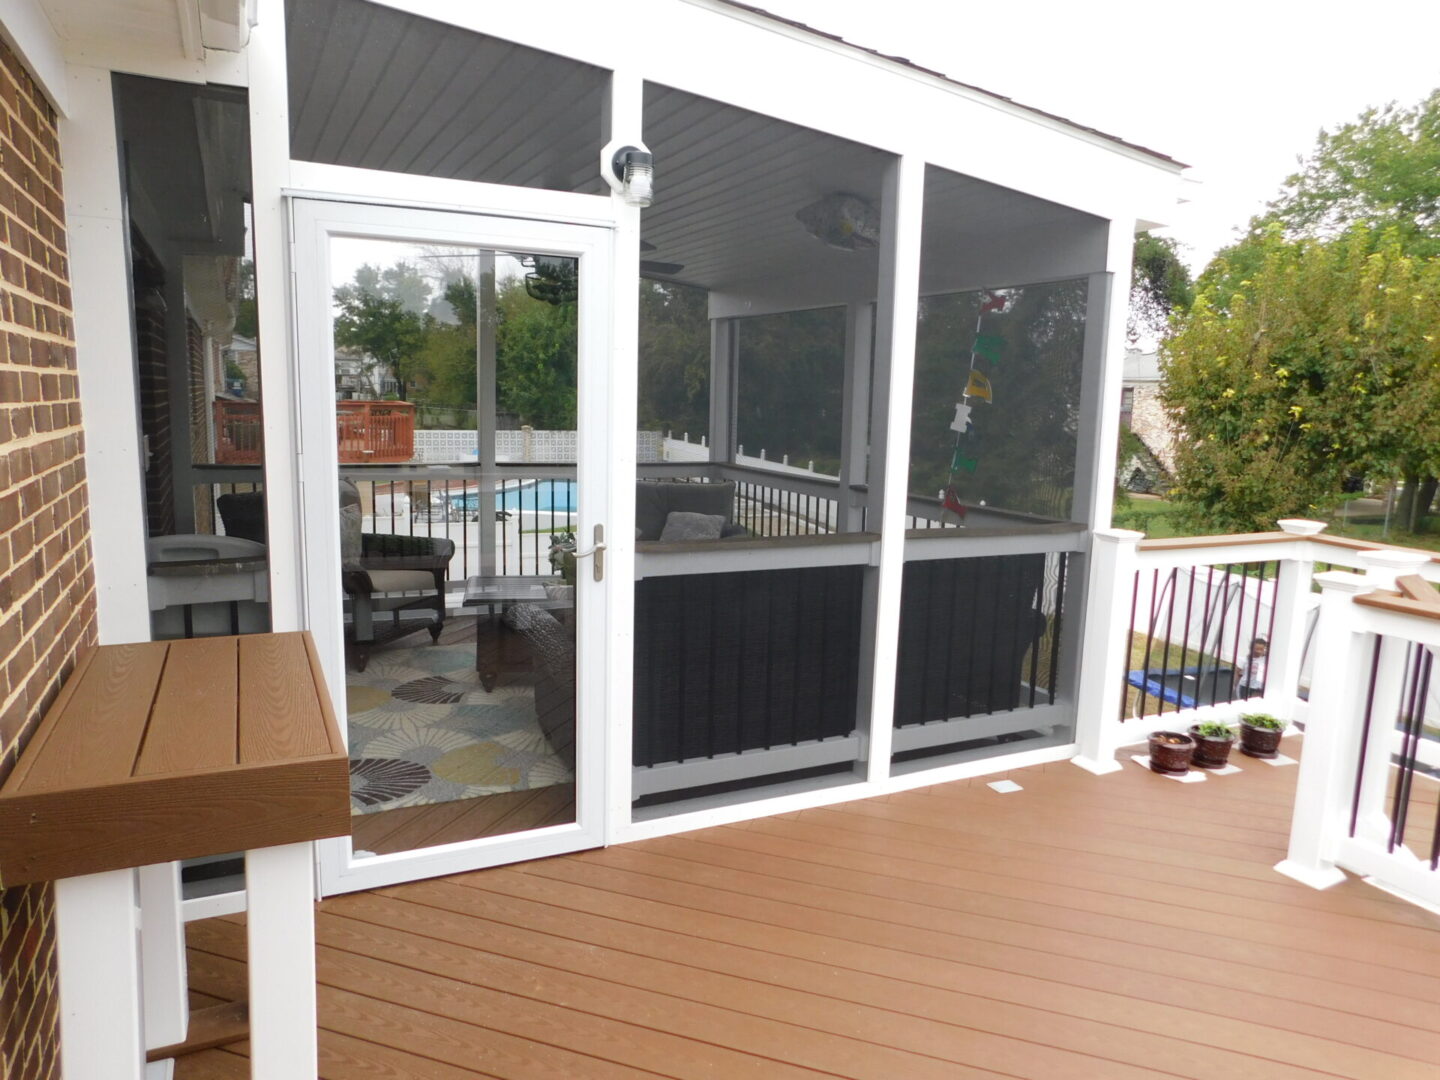 Elevated deck with an enclosed lounge room